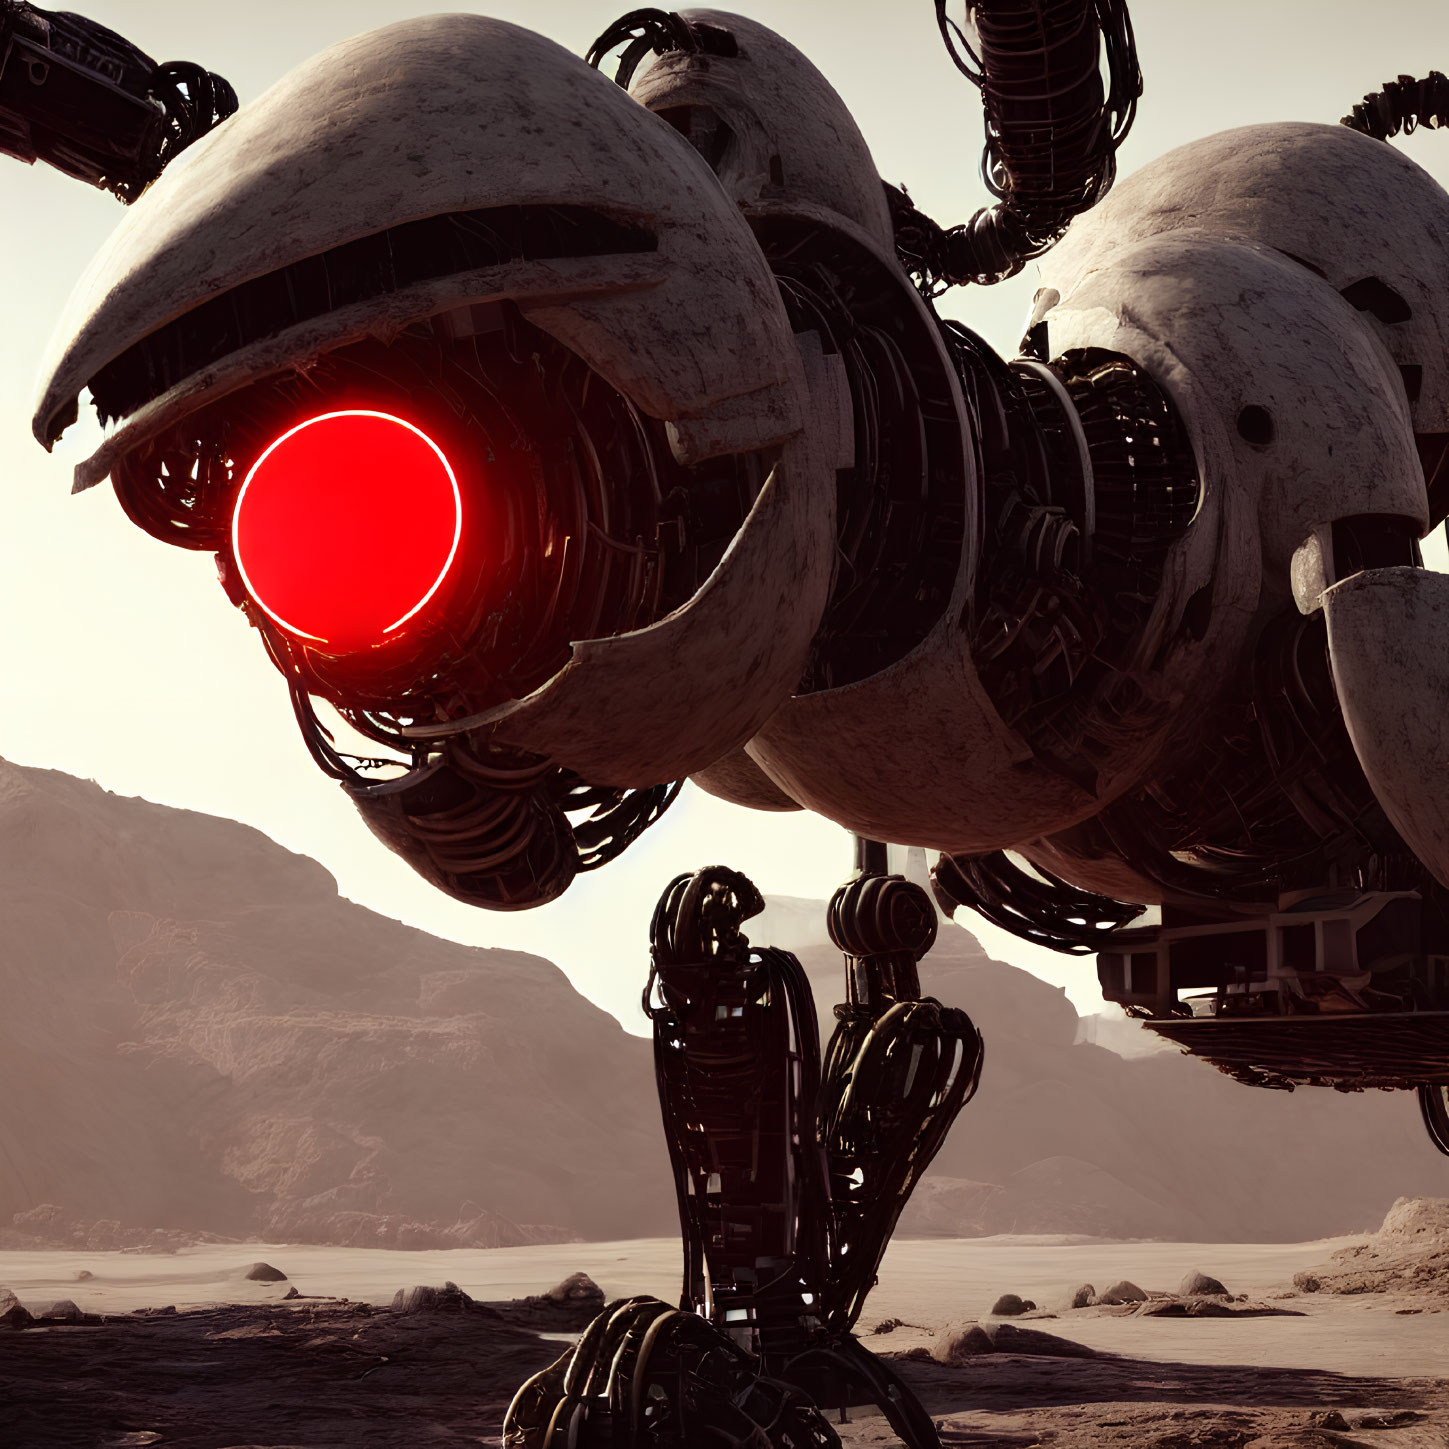 Weathered robot with glowing red eye in desolate landscape